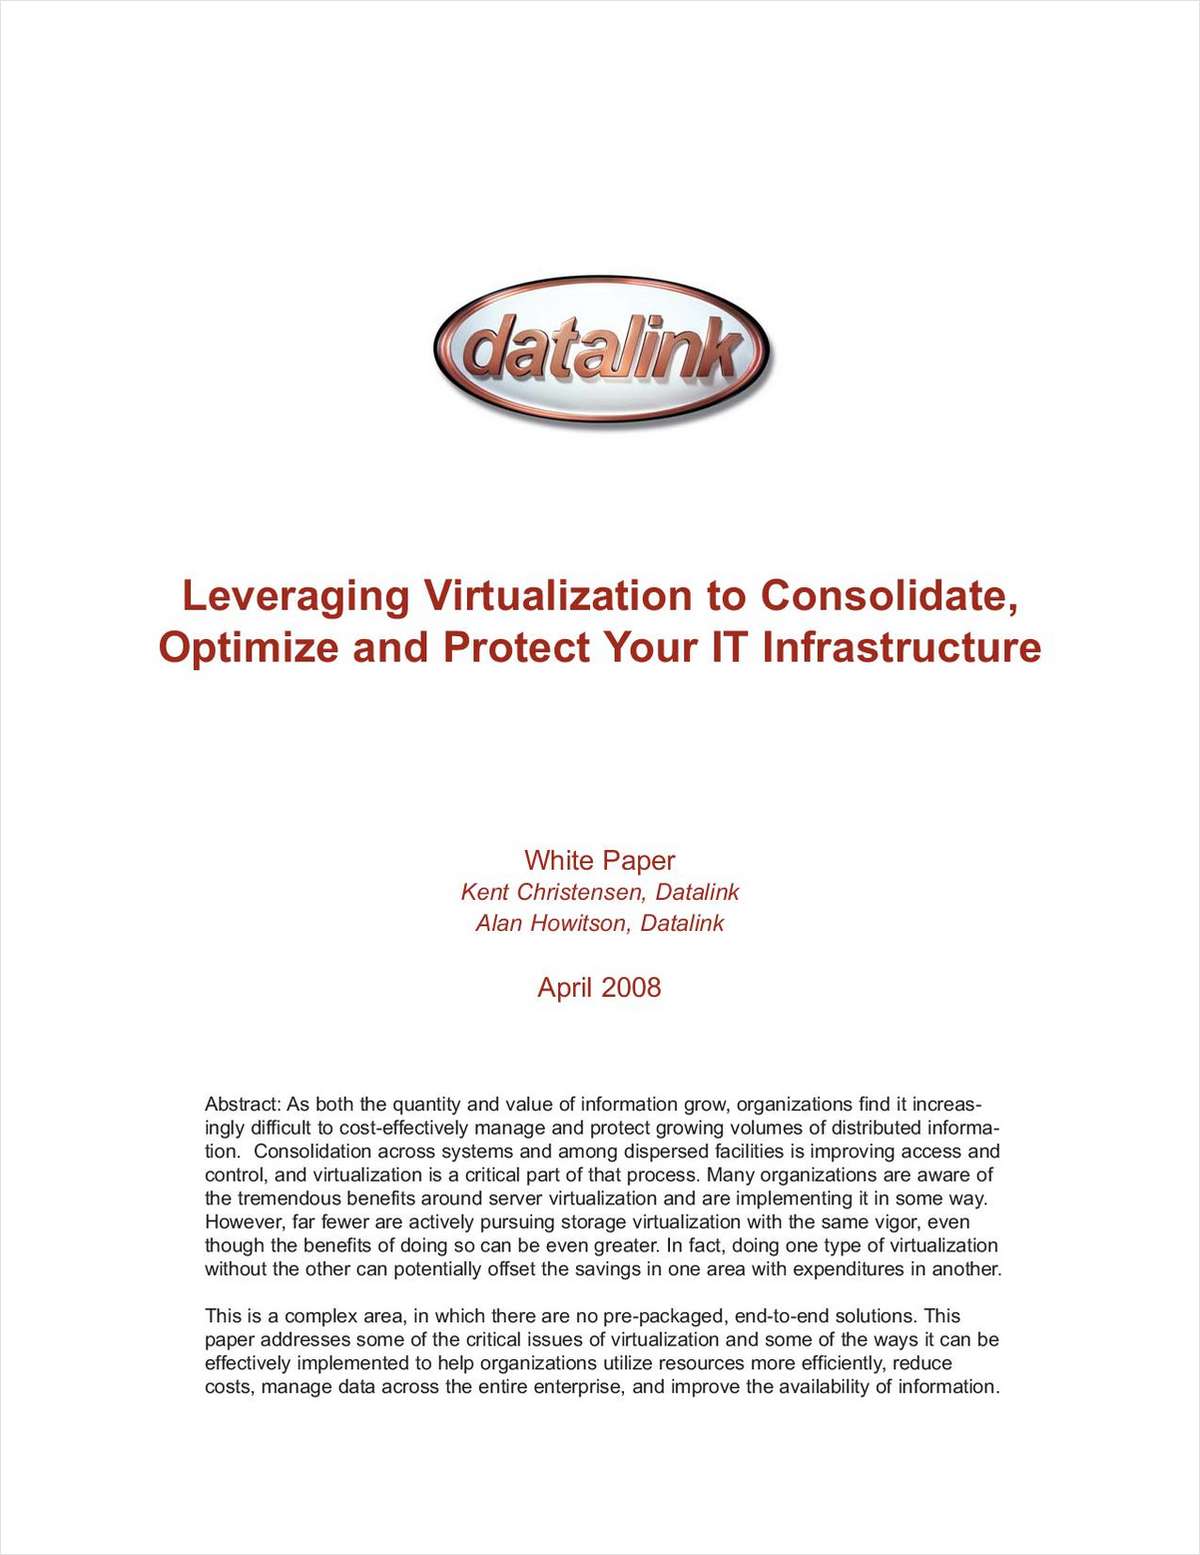 Leveraging Virtualization to Consolidate, Optimize and Protect Your IT Infrastructure